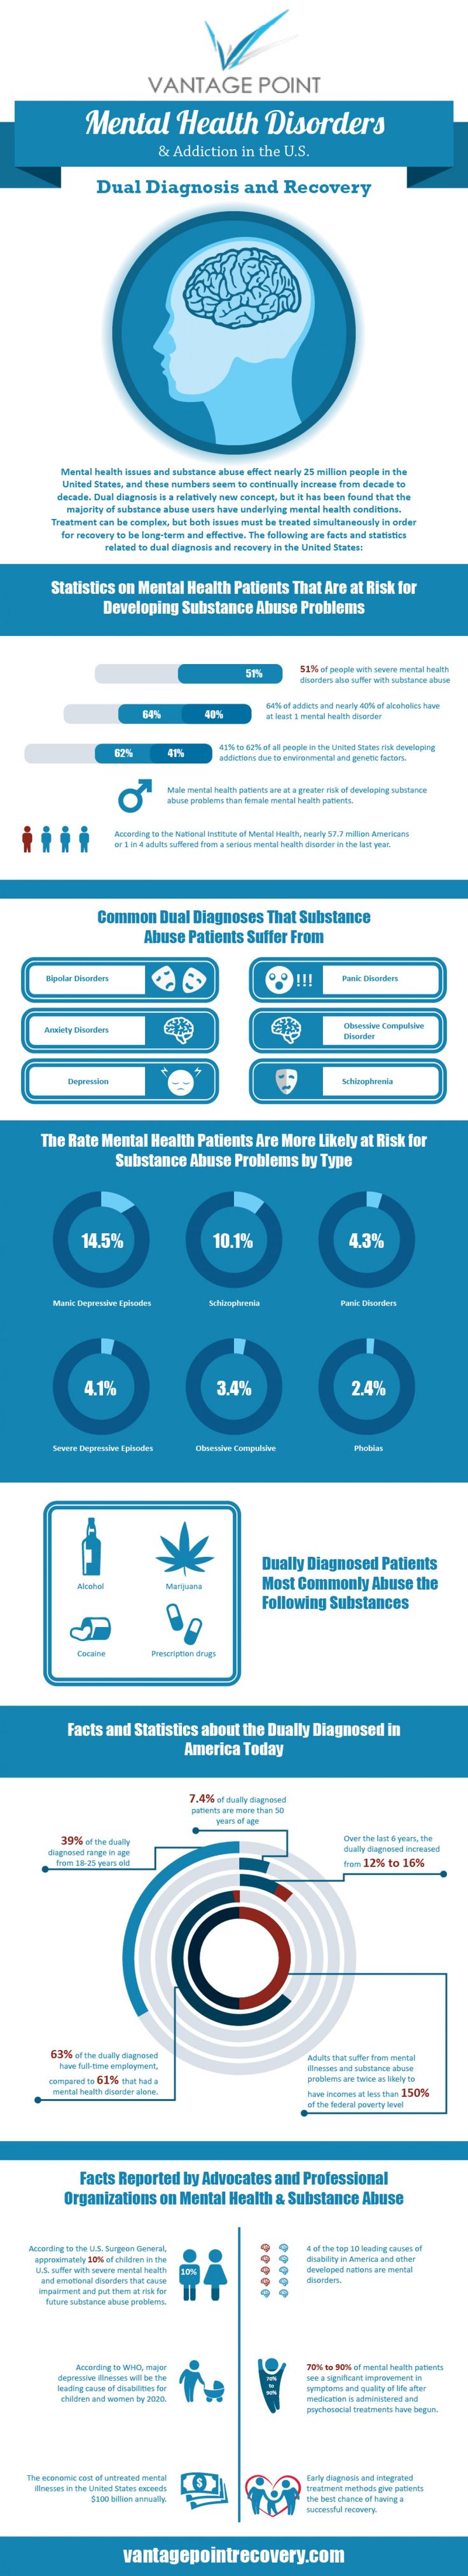 Psychology-Infographic-Mental-Health-Disorders-Addiction-in-the-U.S.-Dual-Diagnosis-and-Recovery-Inf Psychology Infographic : Mental Health Disorders & Addiction in the U.S.: Dual Diagnosis and Recovery Inf...